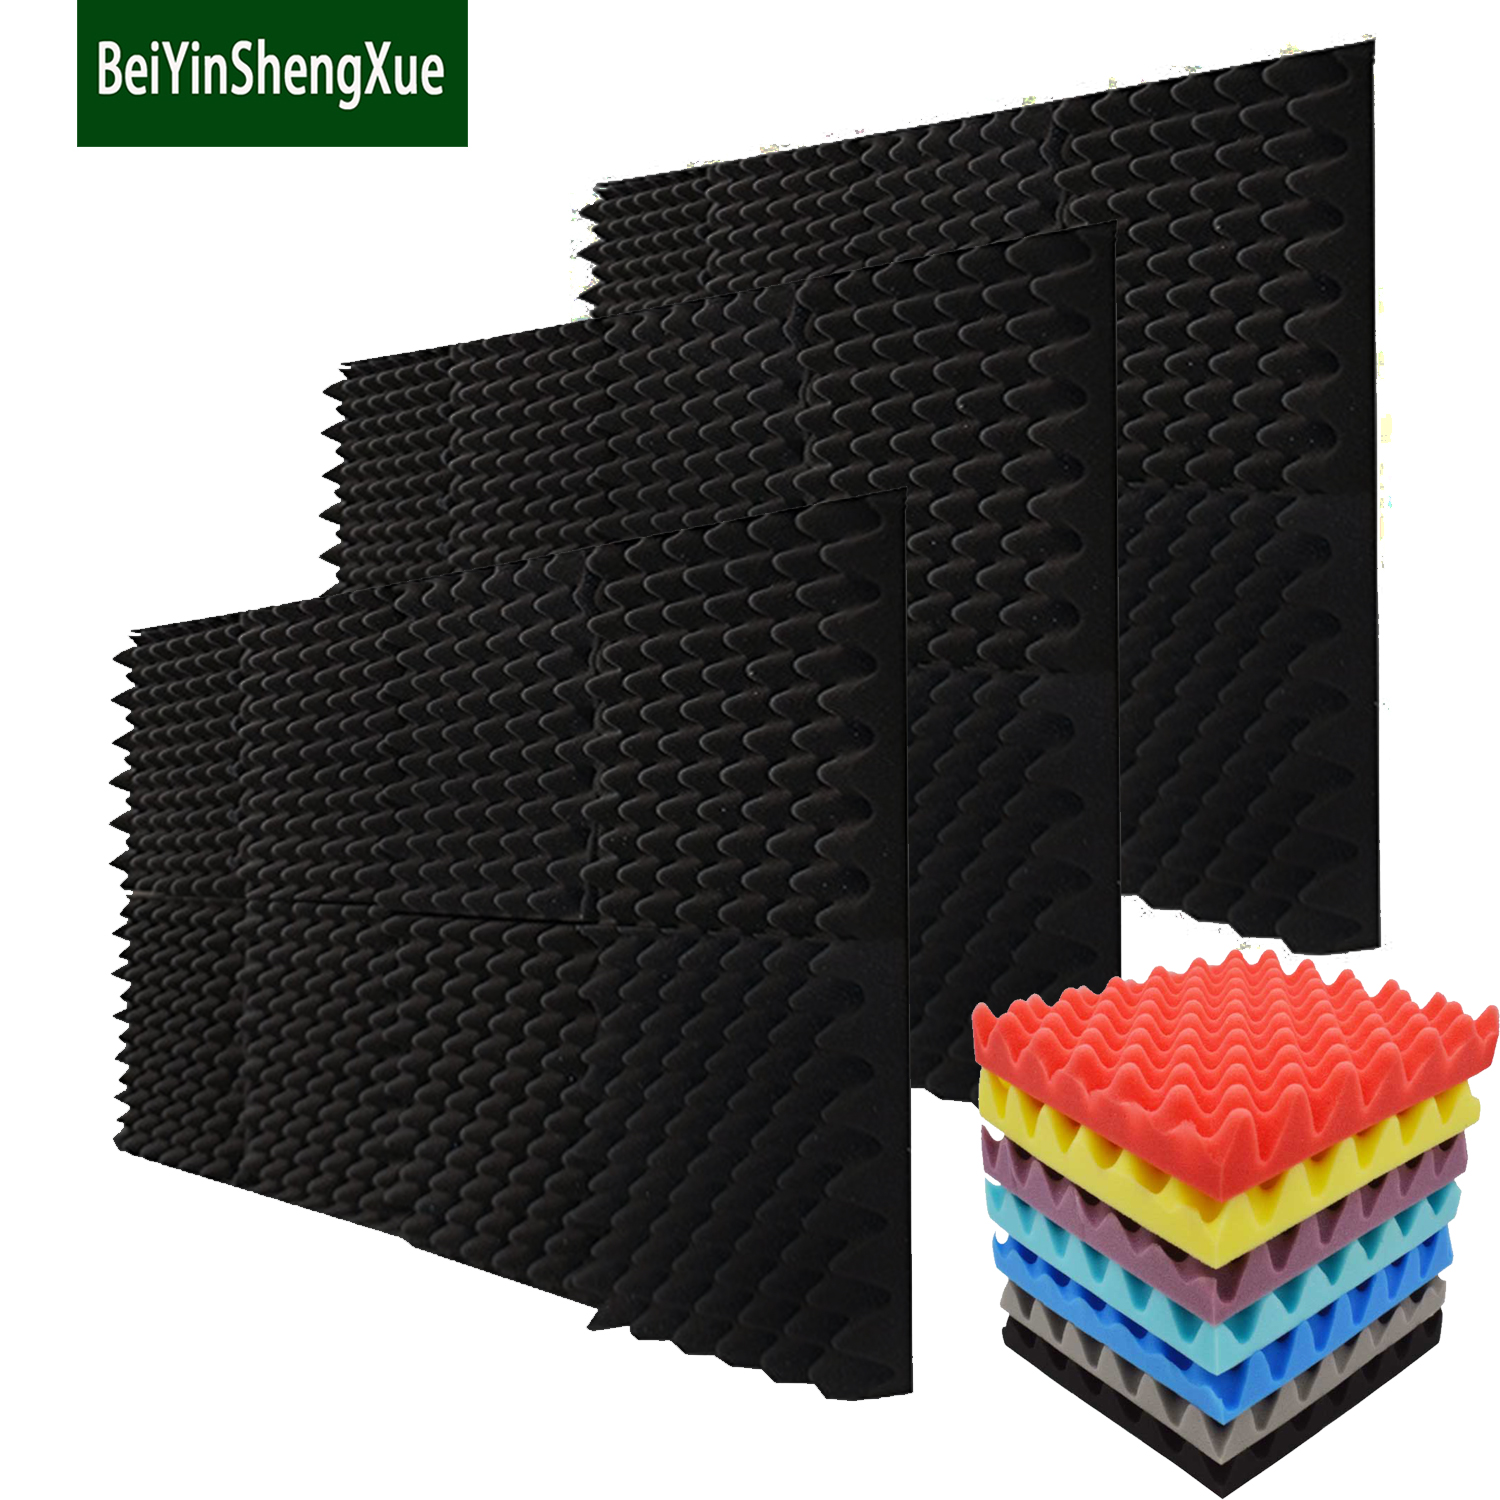 12 Pack Set 2 X 12 X 12 Studio Wedge Tiles Sound Absorber Soundproofing Wall Foam Acoustic Panels Control Sound Dampening Foam Little-Lucky Acoustic Foam Panels 12Pack, Black 